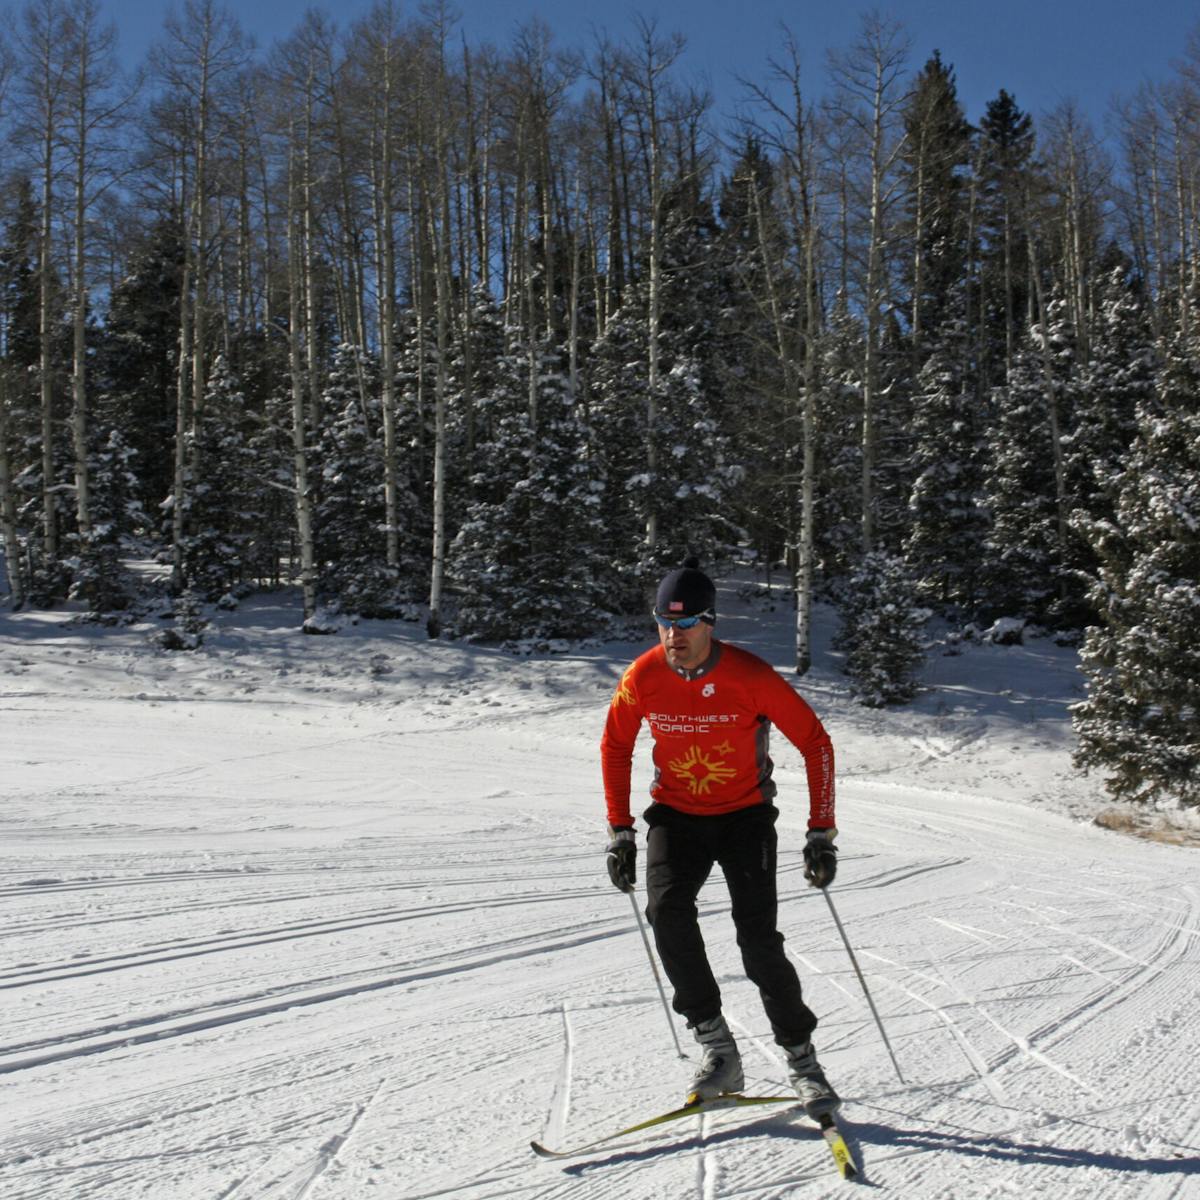 a man is cross country skiing on a snow covered slope